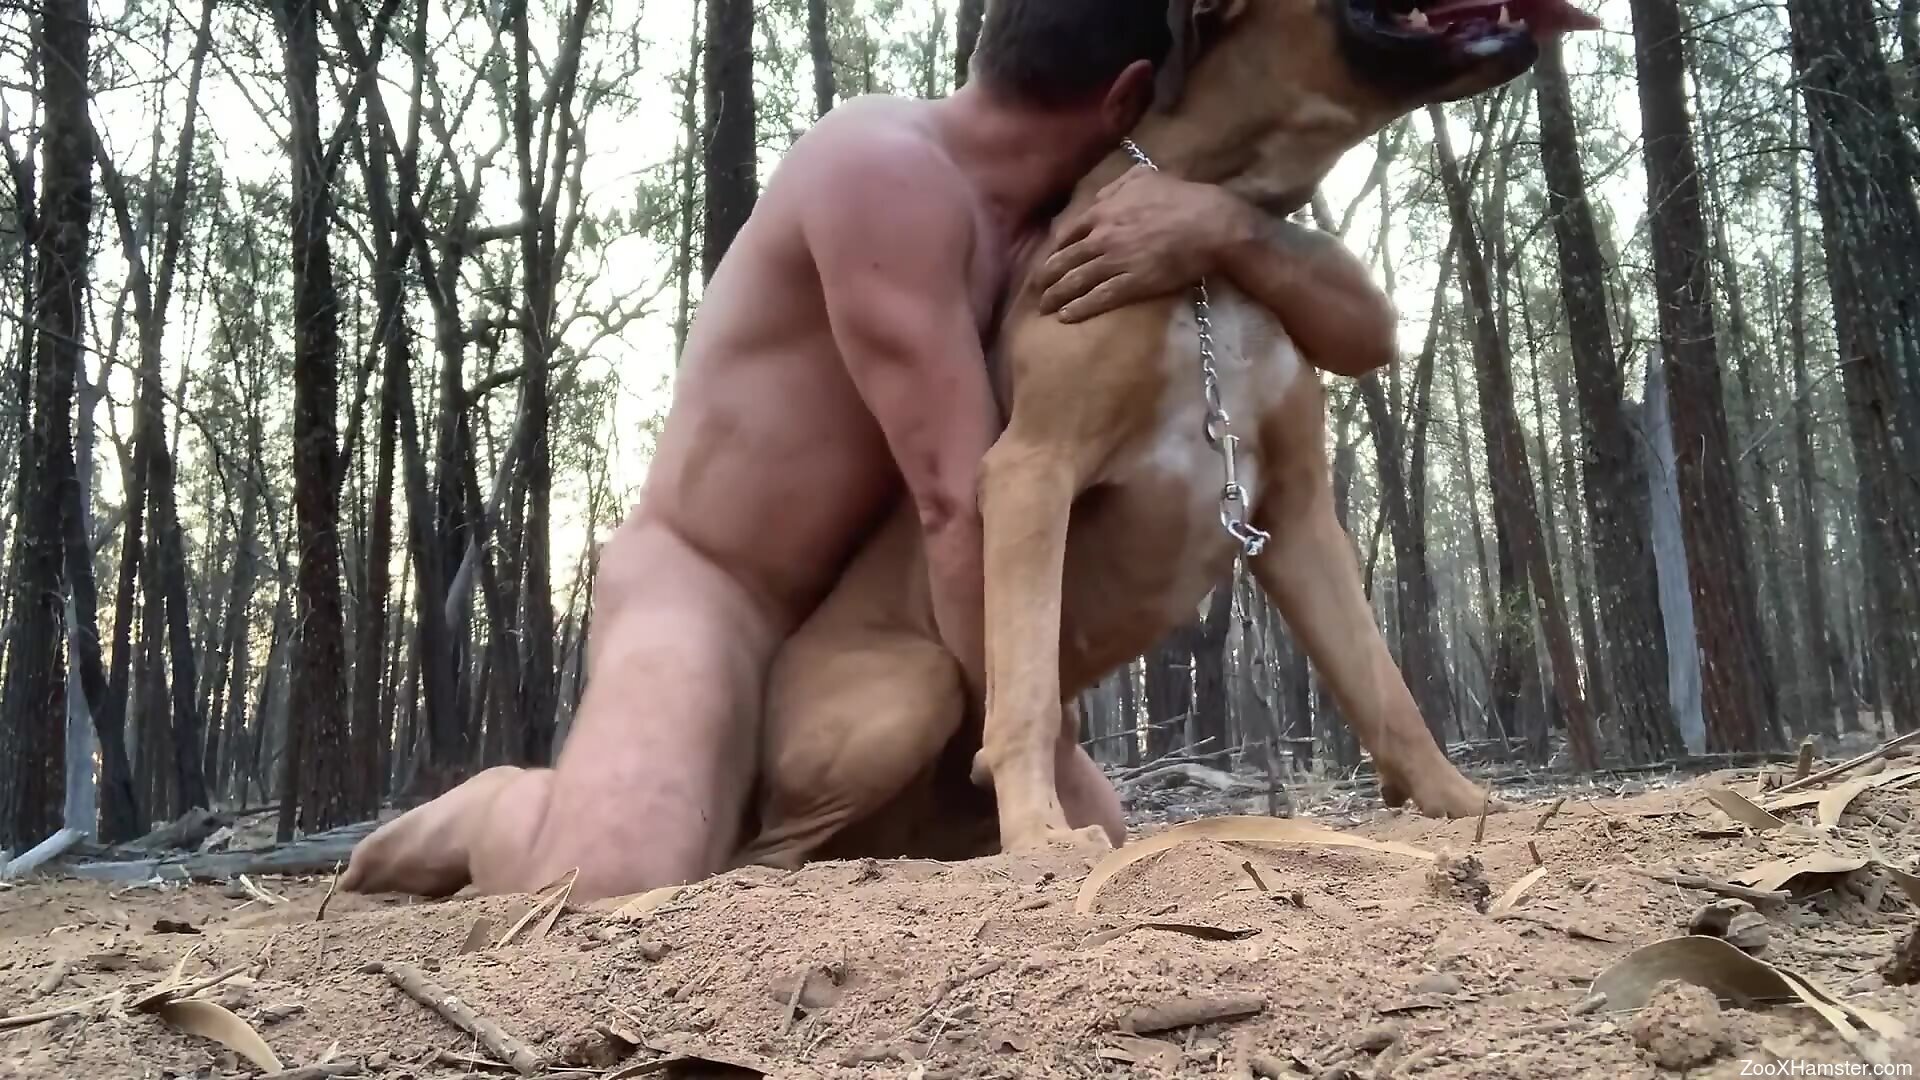 Baboon Fucks Woman - Muscular guy fucking a sexy brown beast from behind